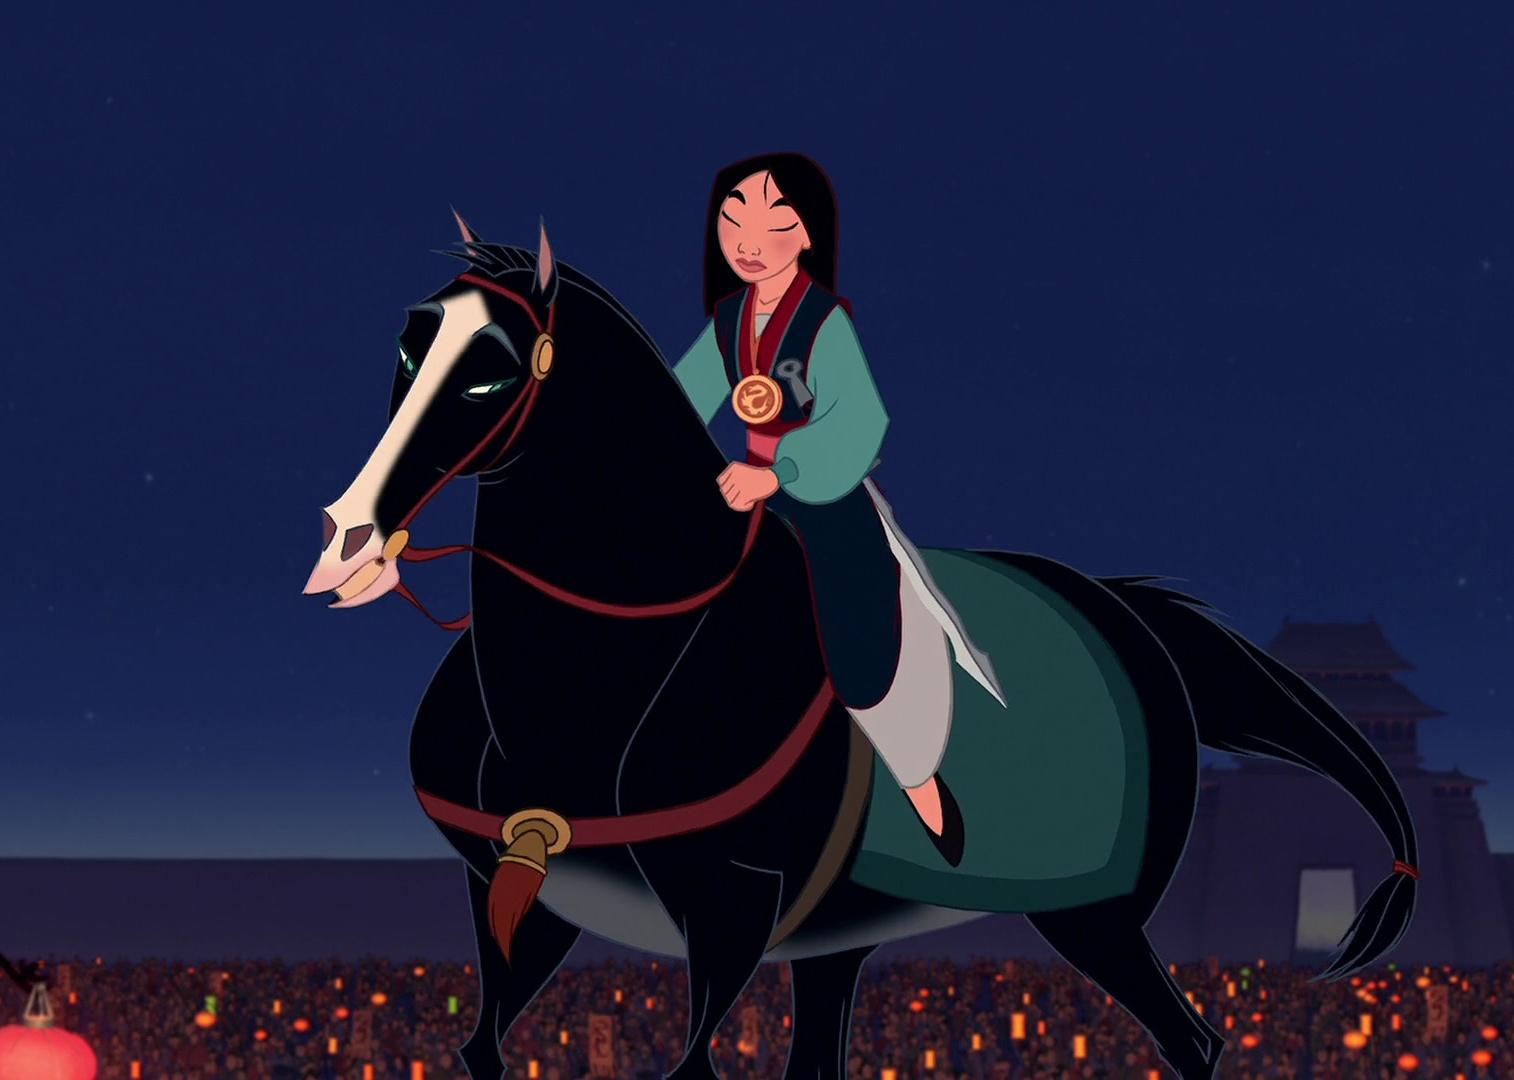 An animation of a woman warrior on a horse.